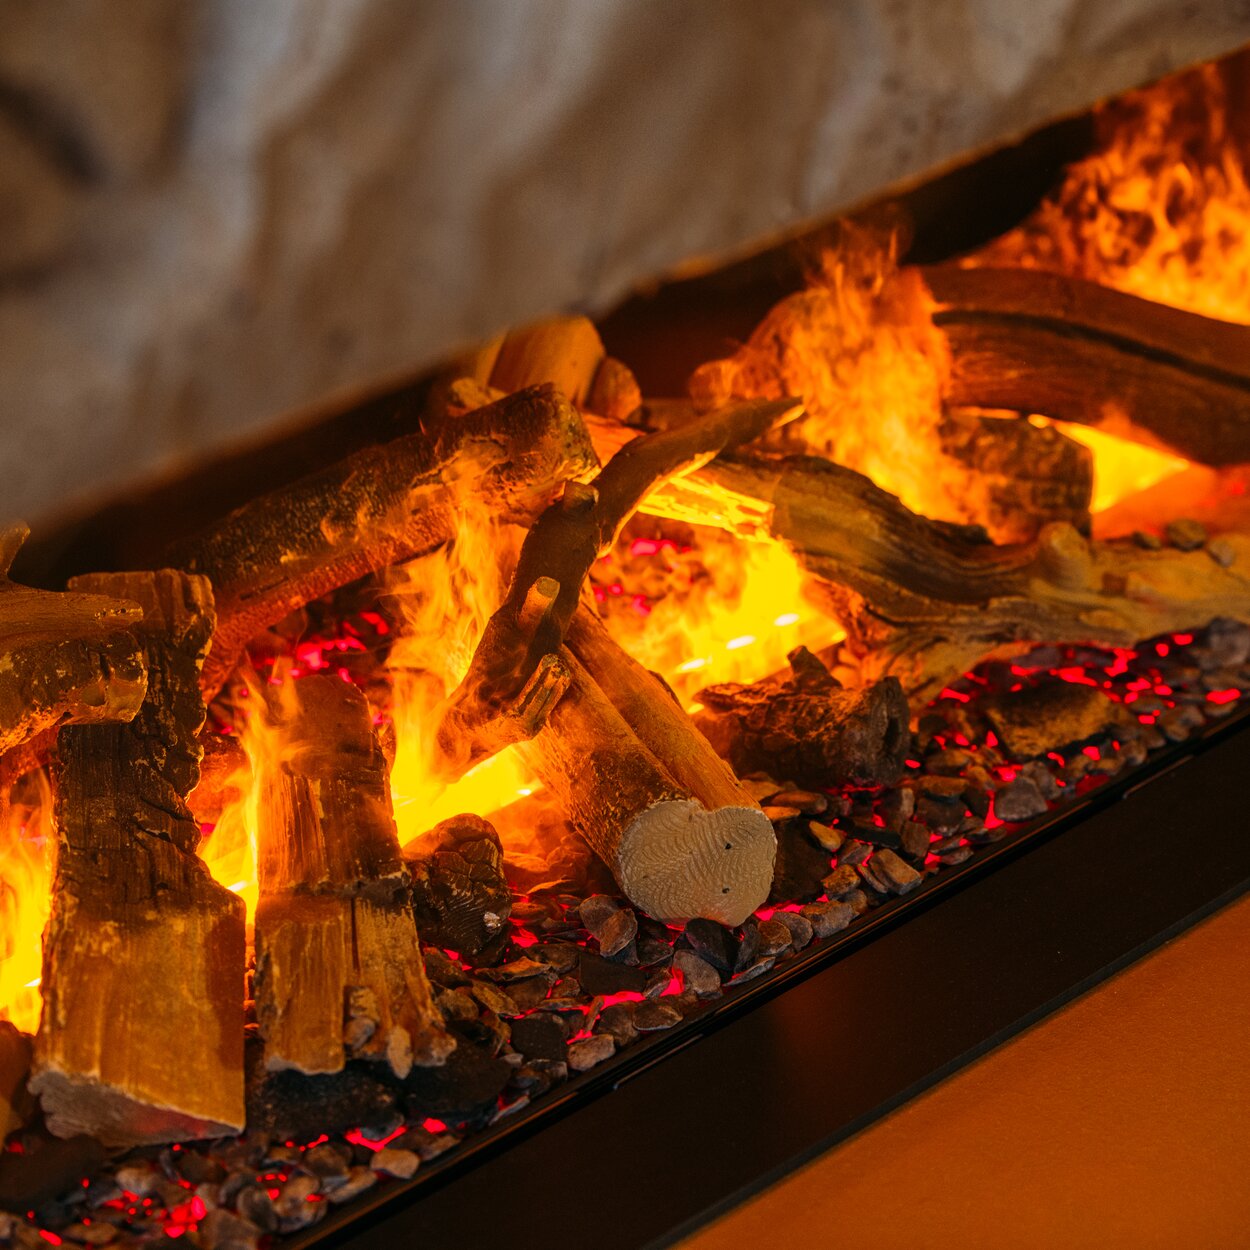 The wood logs and water vapour flames are illuminated with LED lamps to create an electric fire.